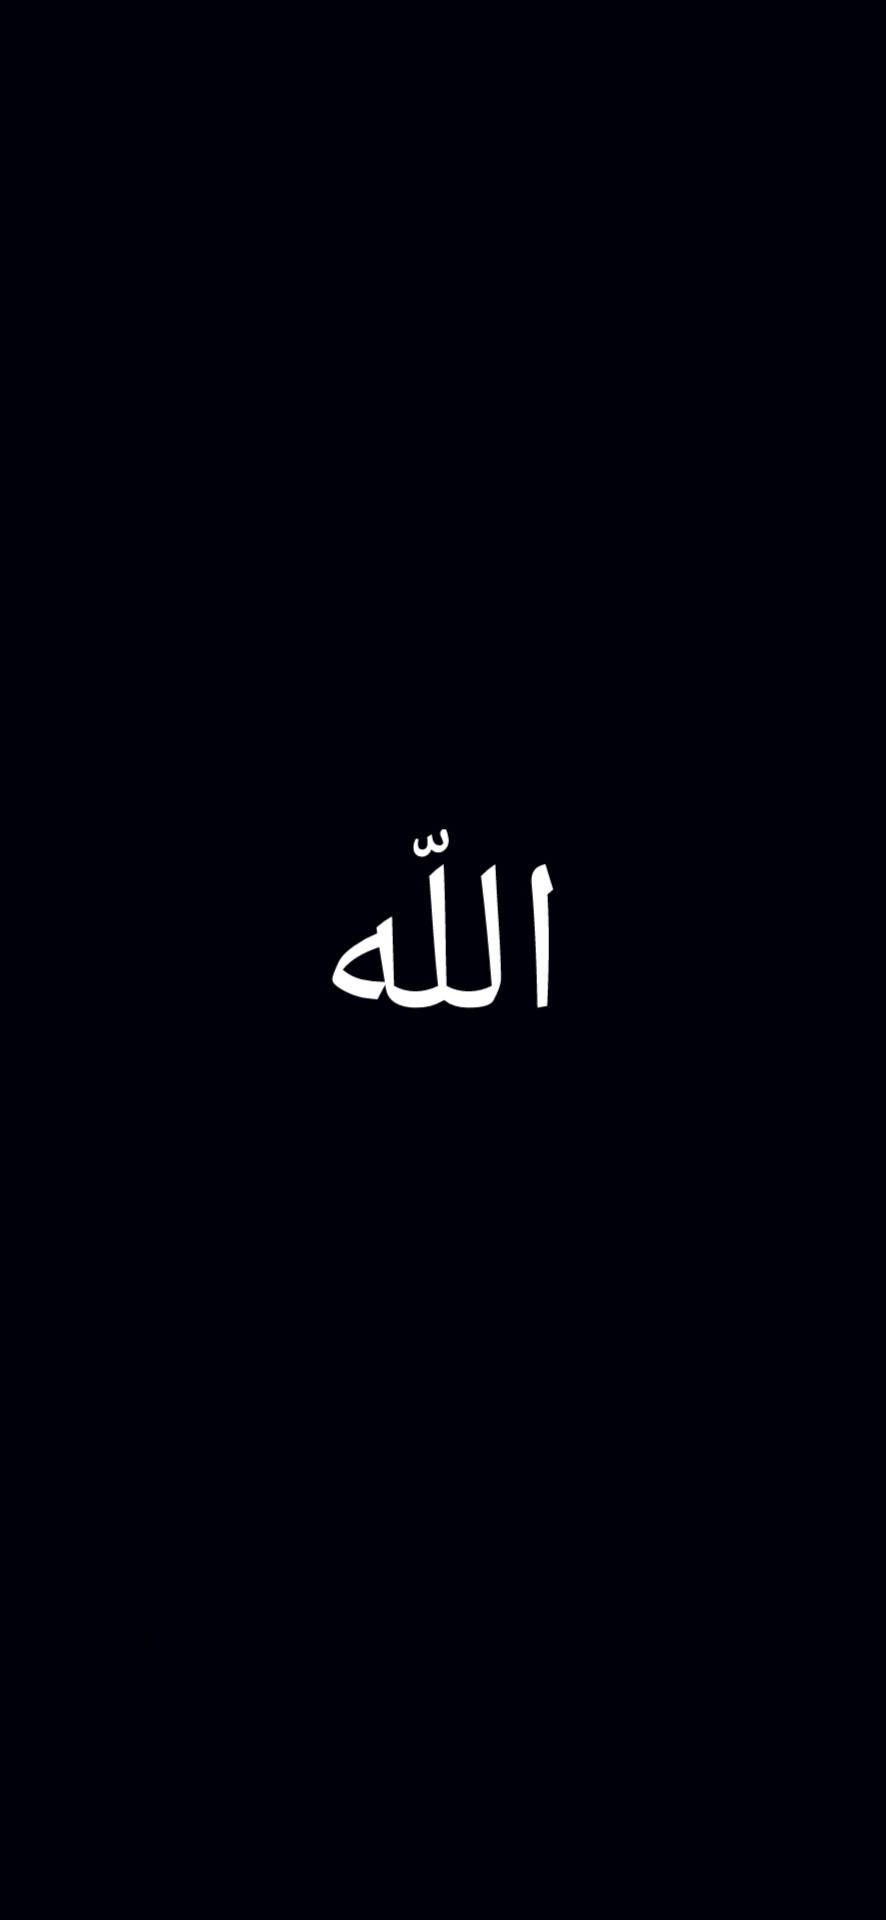 Name Of Allah Swt Wallpaper 886x1920 – S - Chill-out Wallpapers